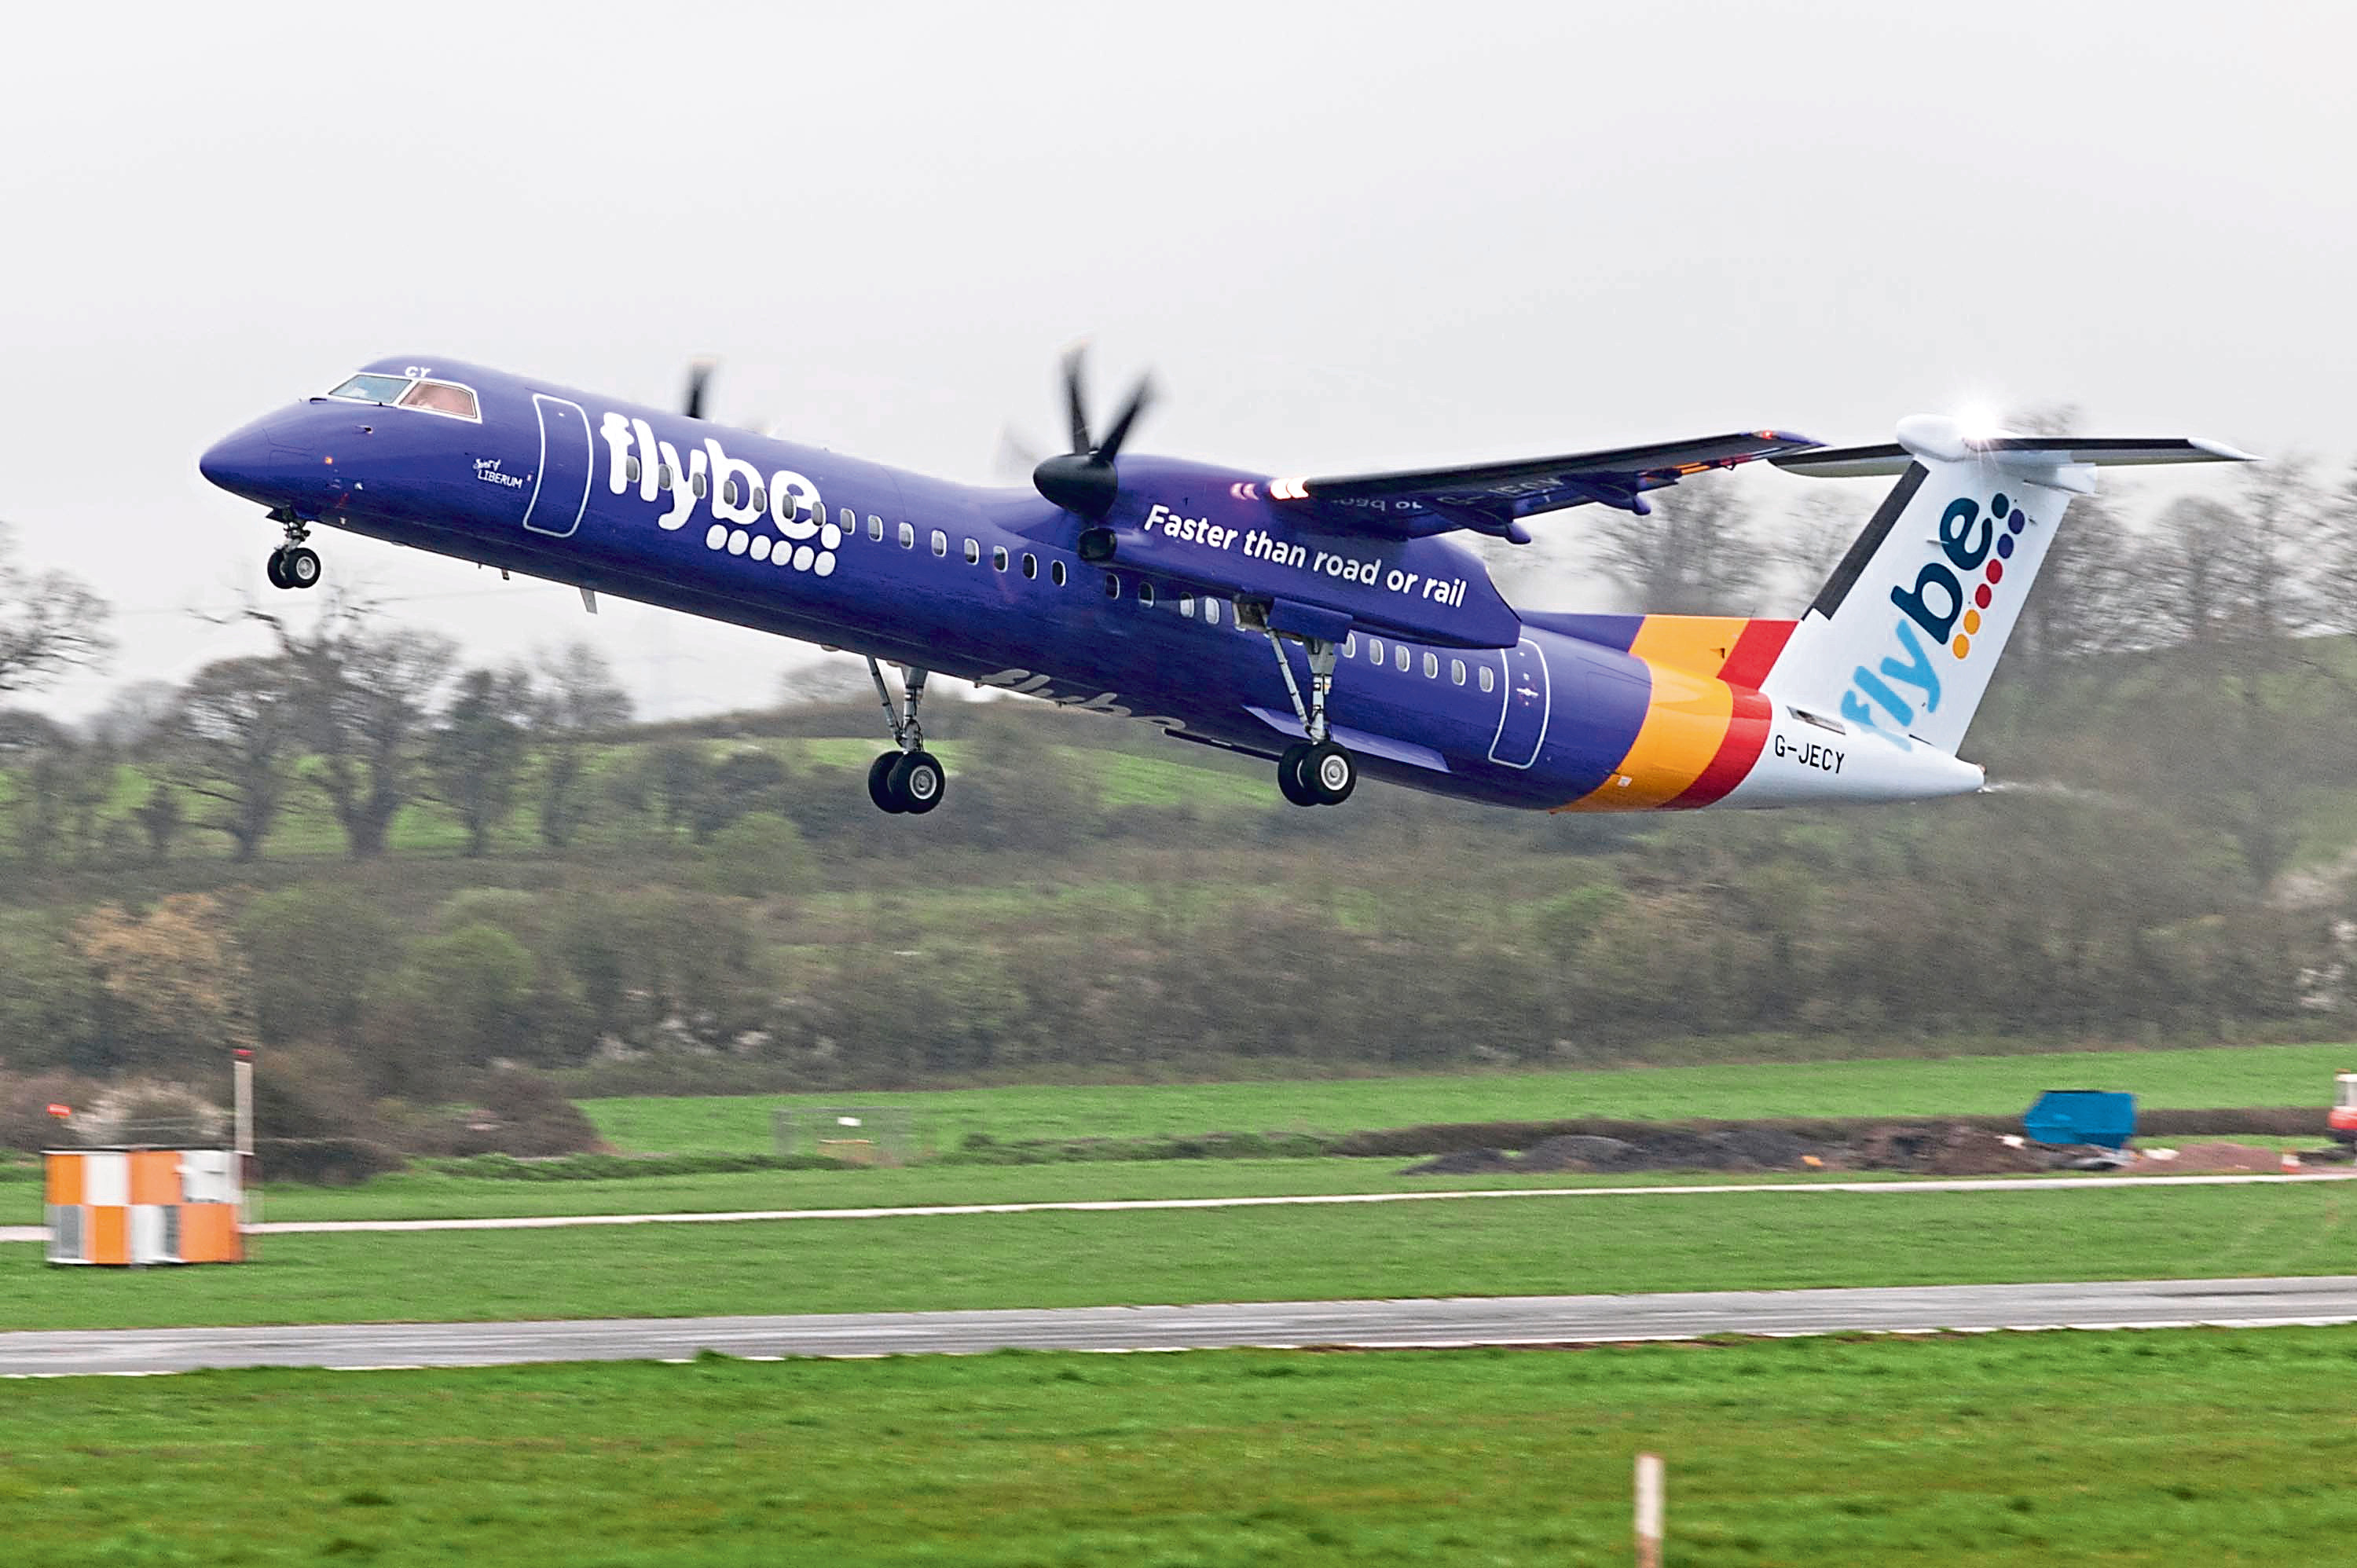 Flybe purple plane
Photo by Theo Moye